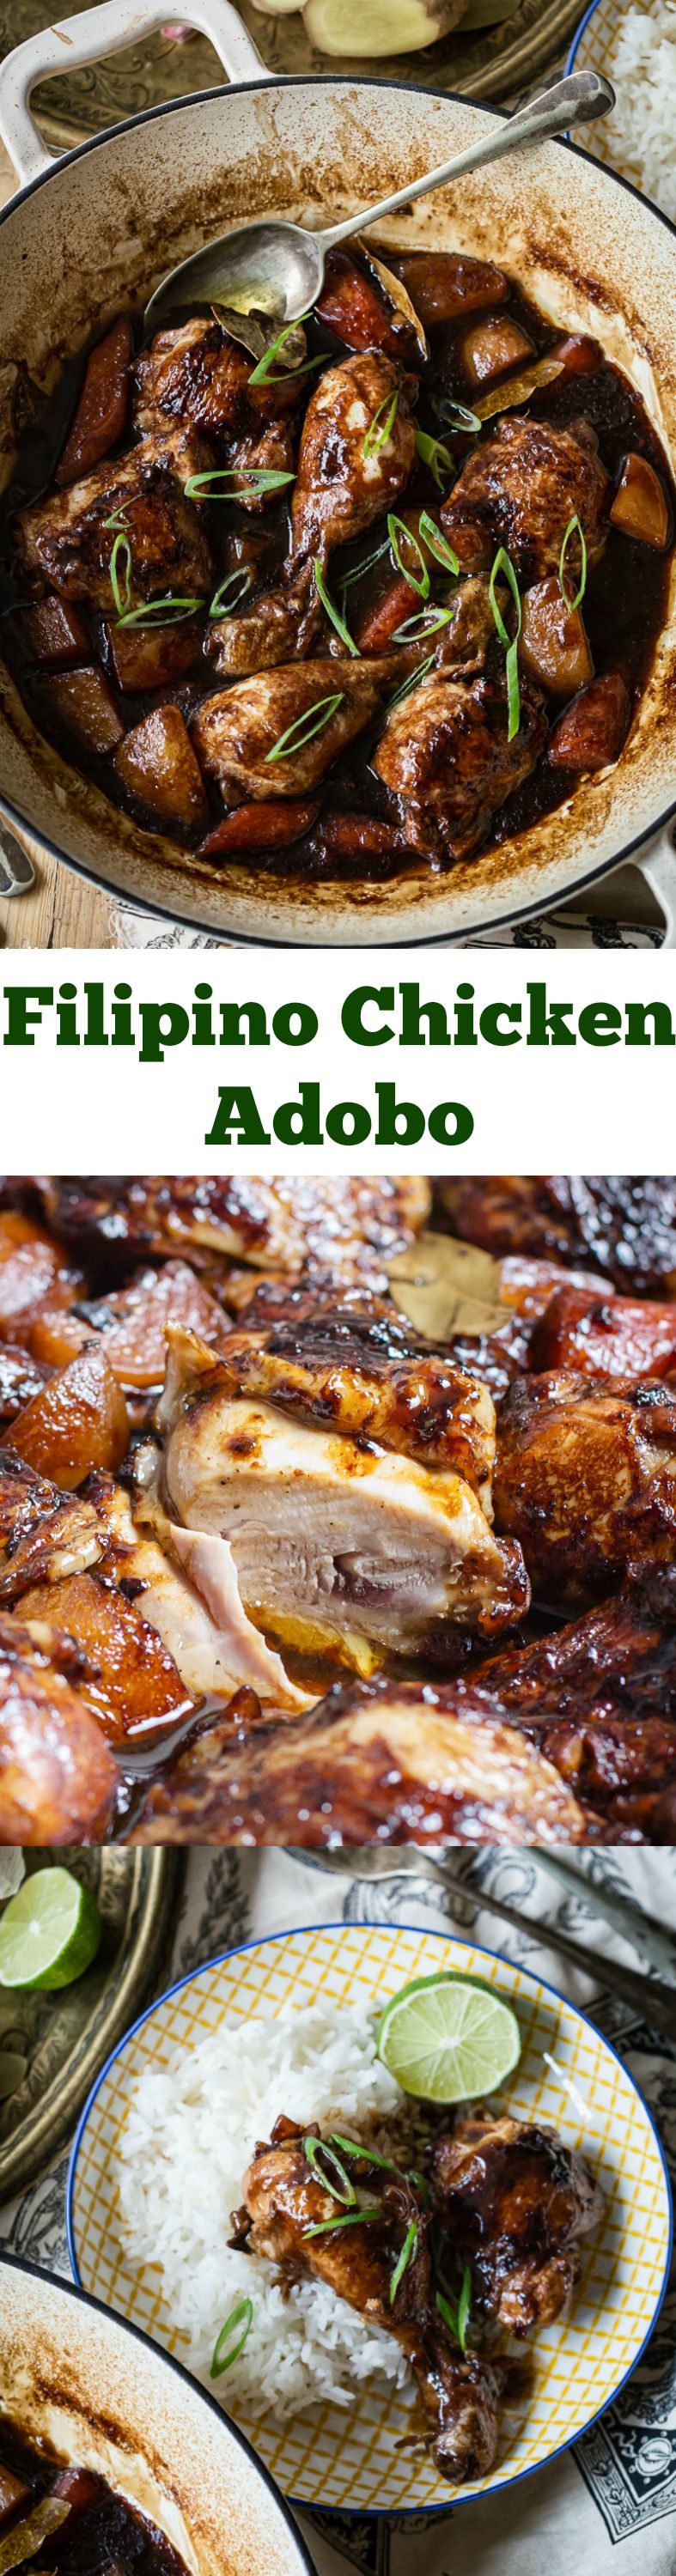 Delicious one pot chicken with carrots and potatoes in a rich and flavourful Filipino Adobo sauce.